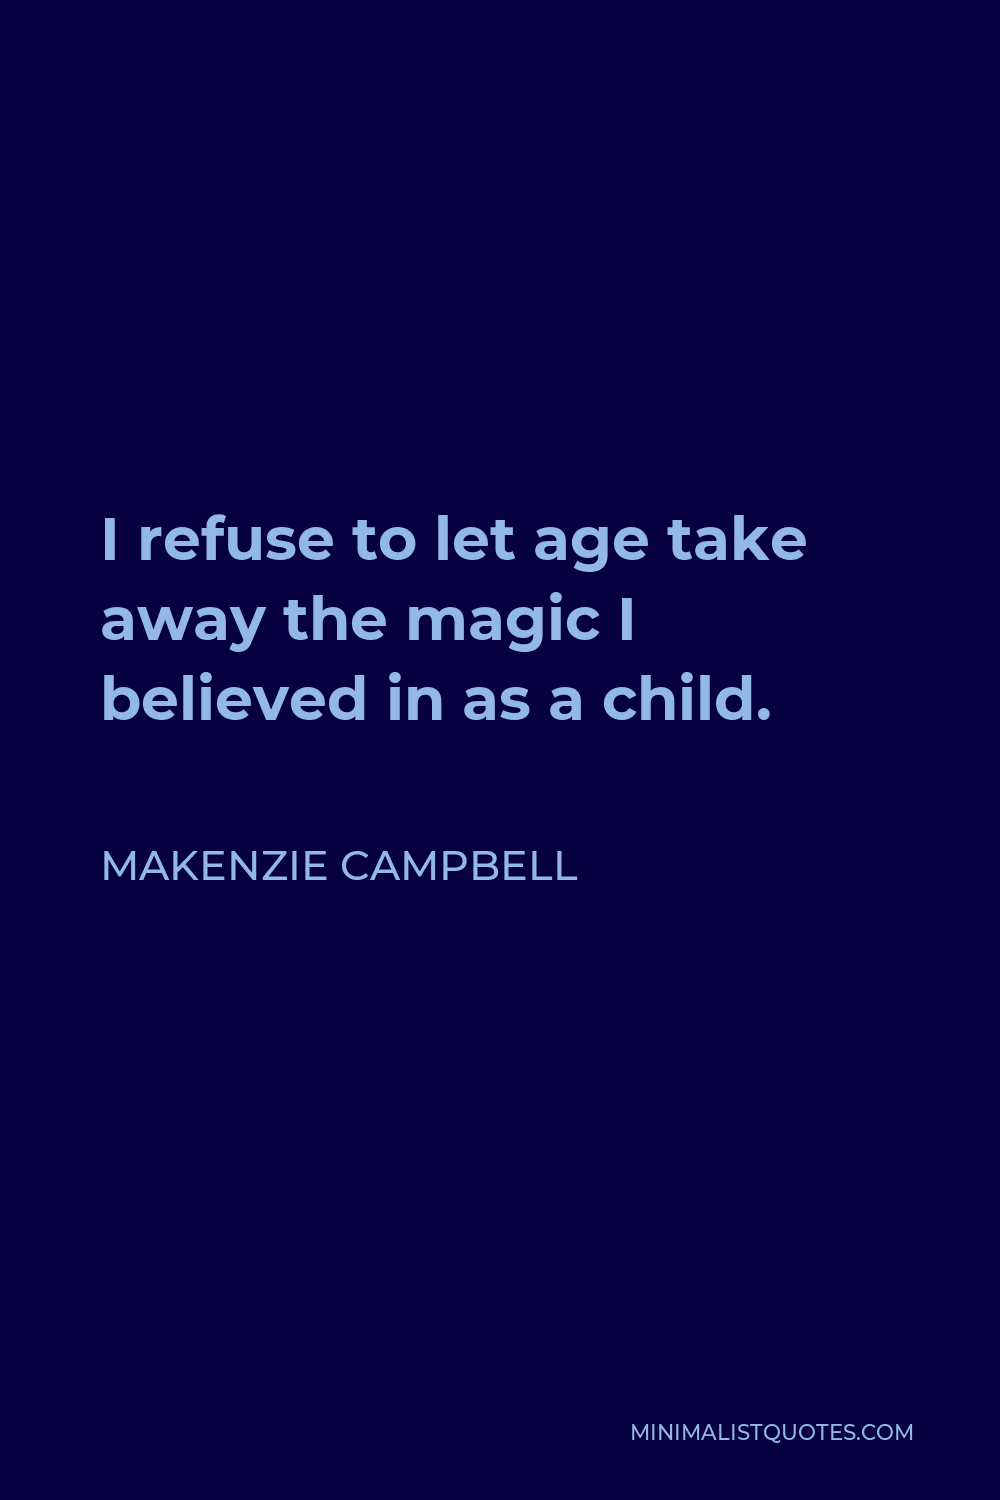 Makenzie Campbell Quote - I refuse to let age take away the magic I believed in as a child.